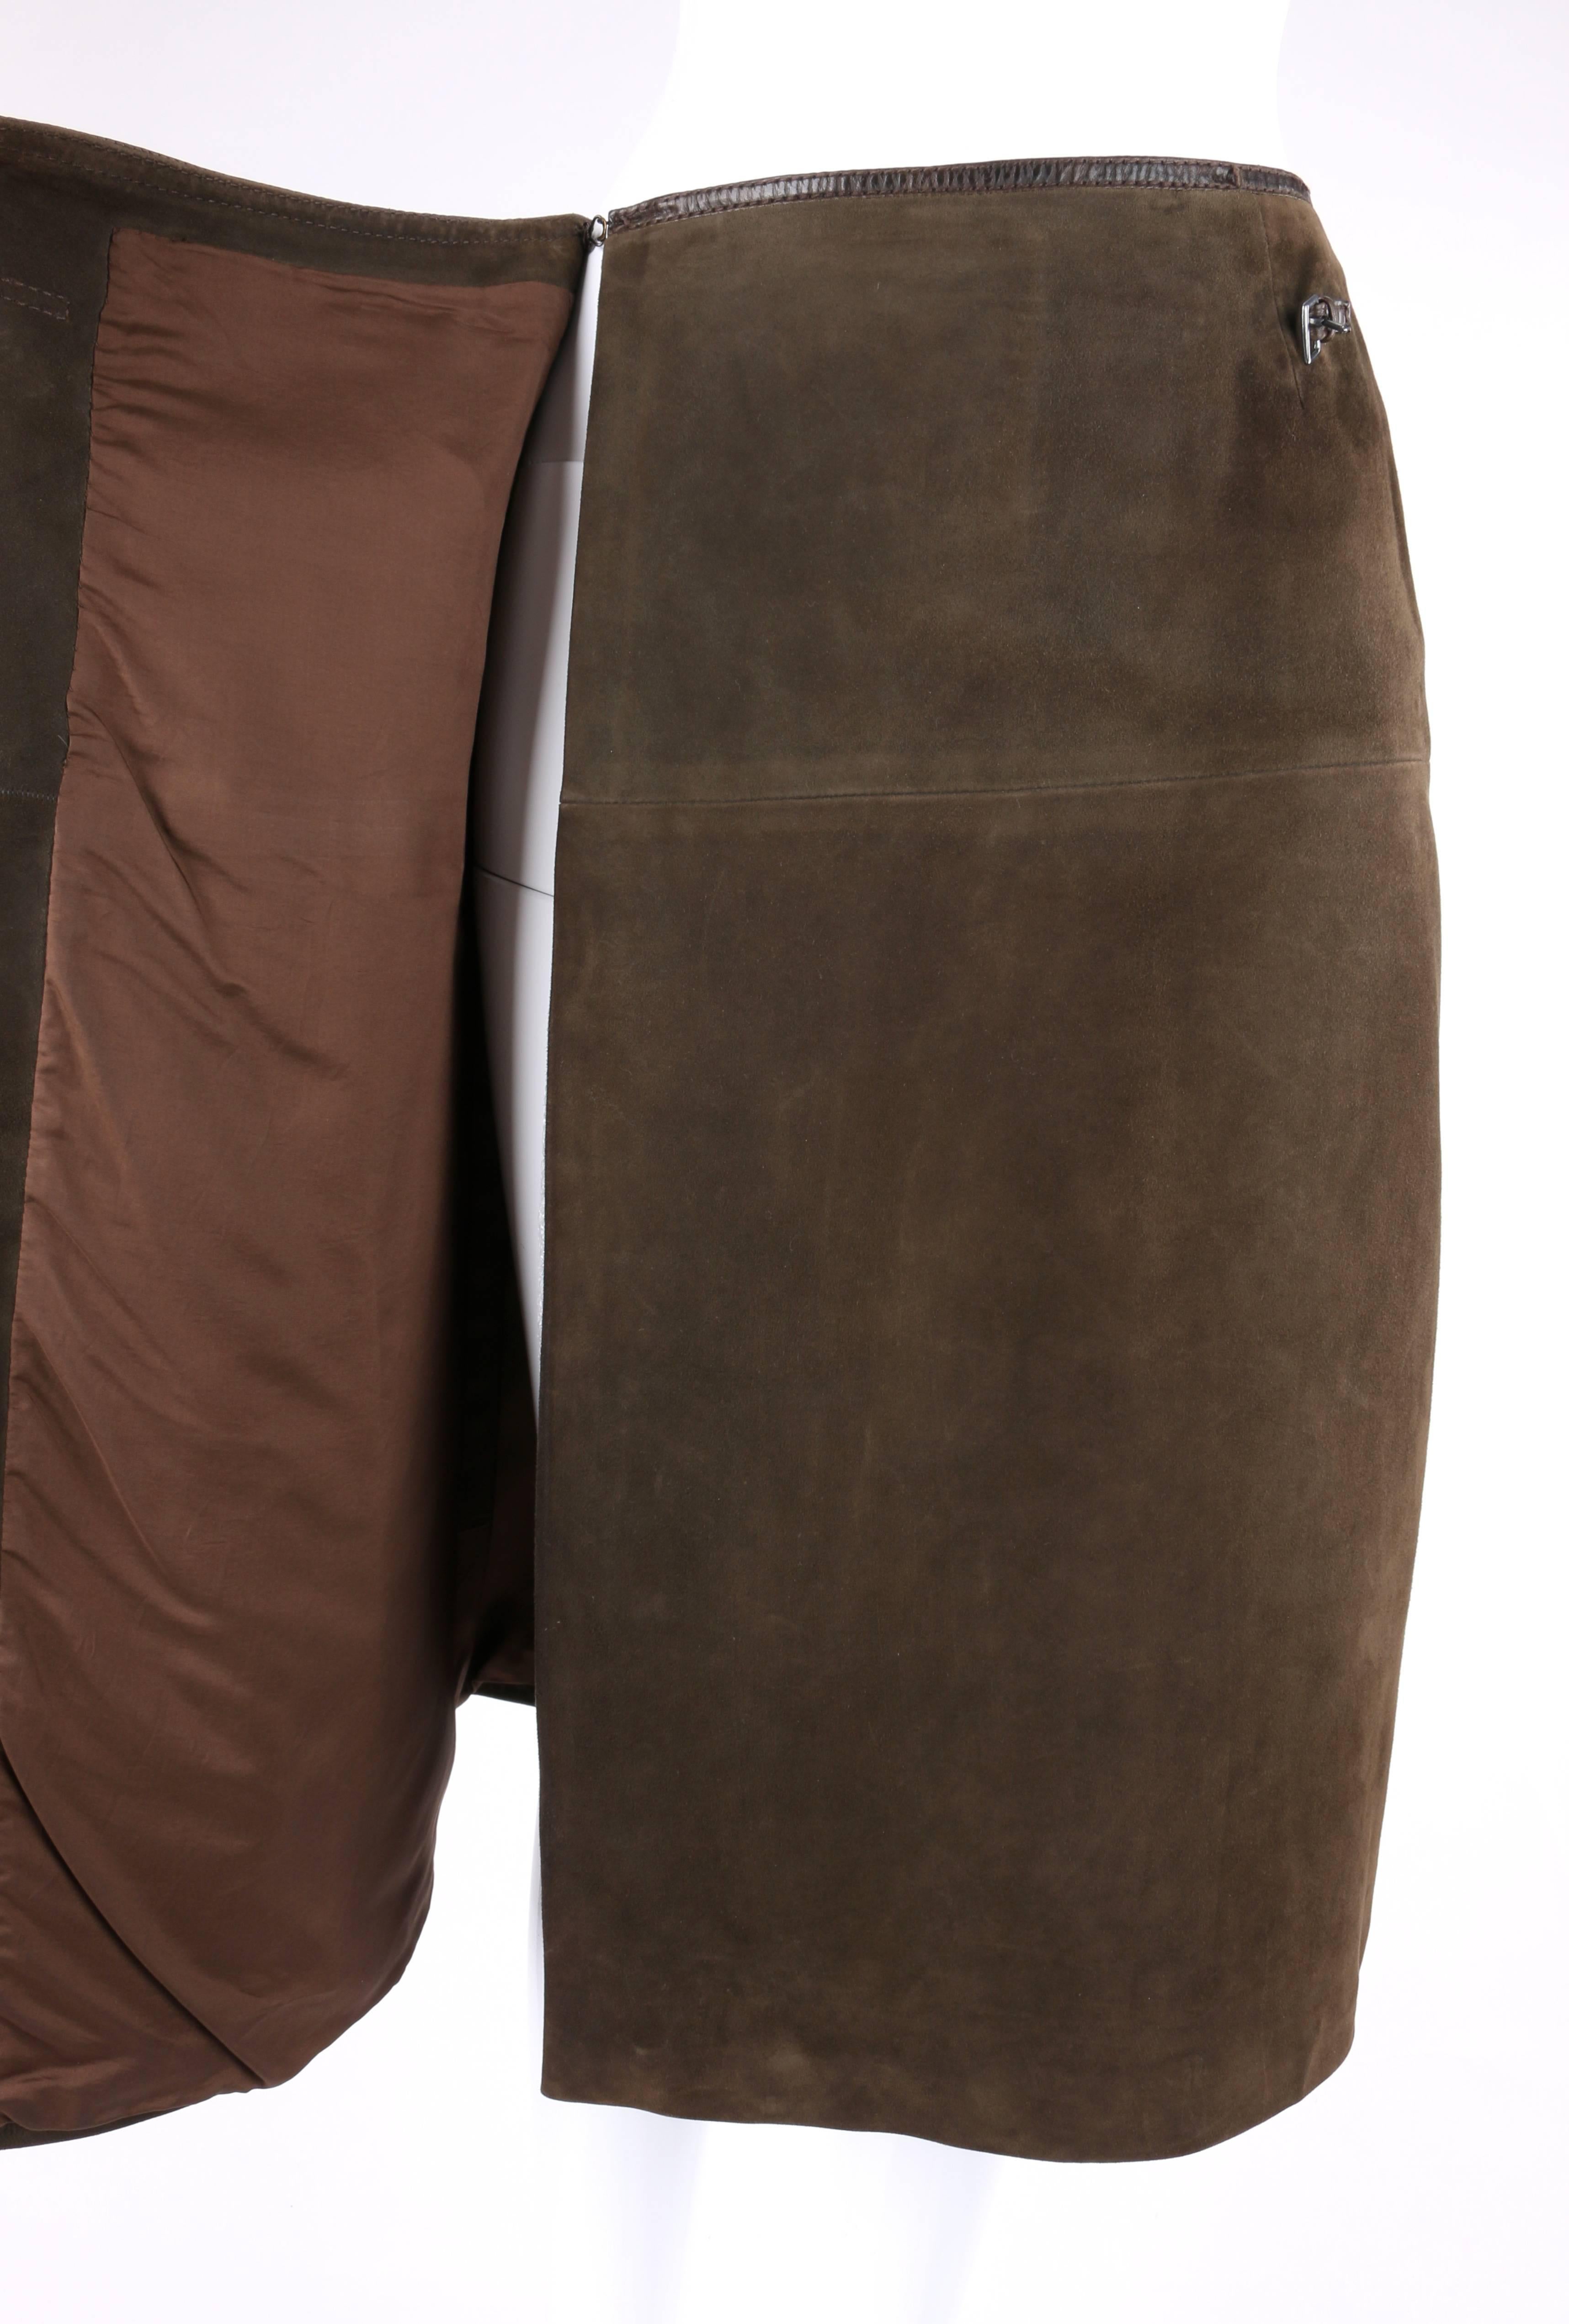 HERMES Sport c.1970's Brown Suede Leather Wrap Skirt 1